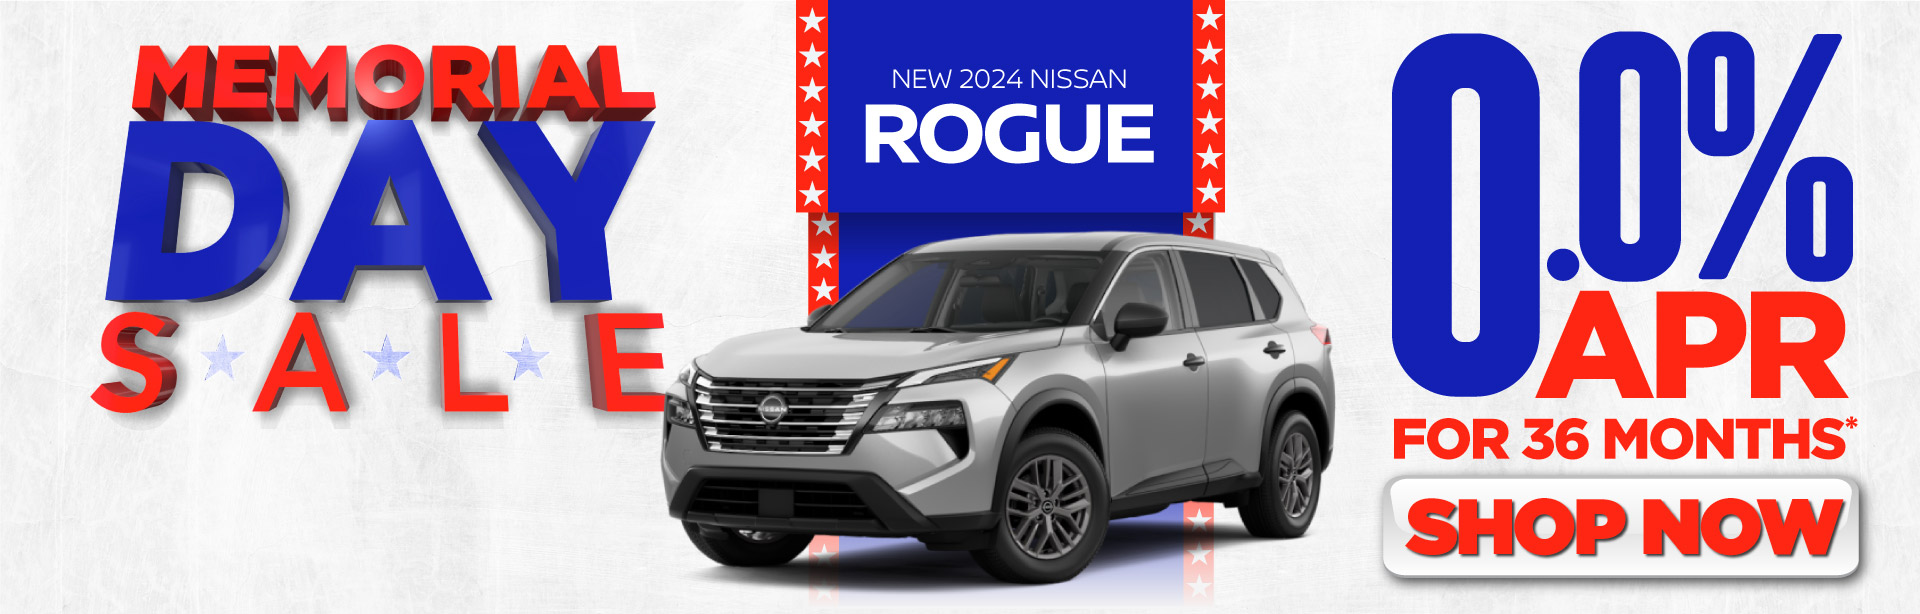 New 2024 Nissan Rogue - 0.0% APR for 36 Months* | Shop Now